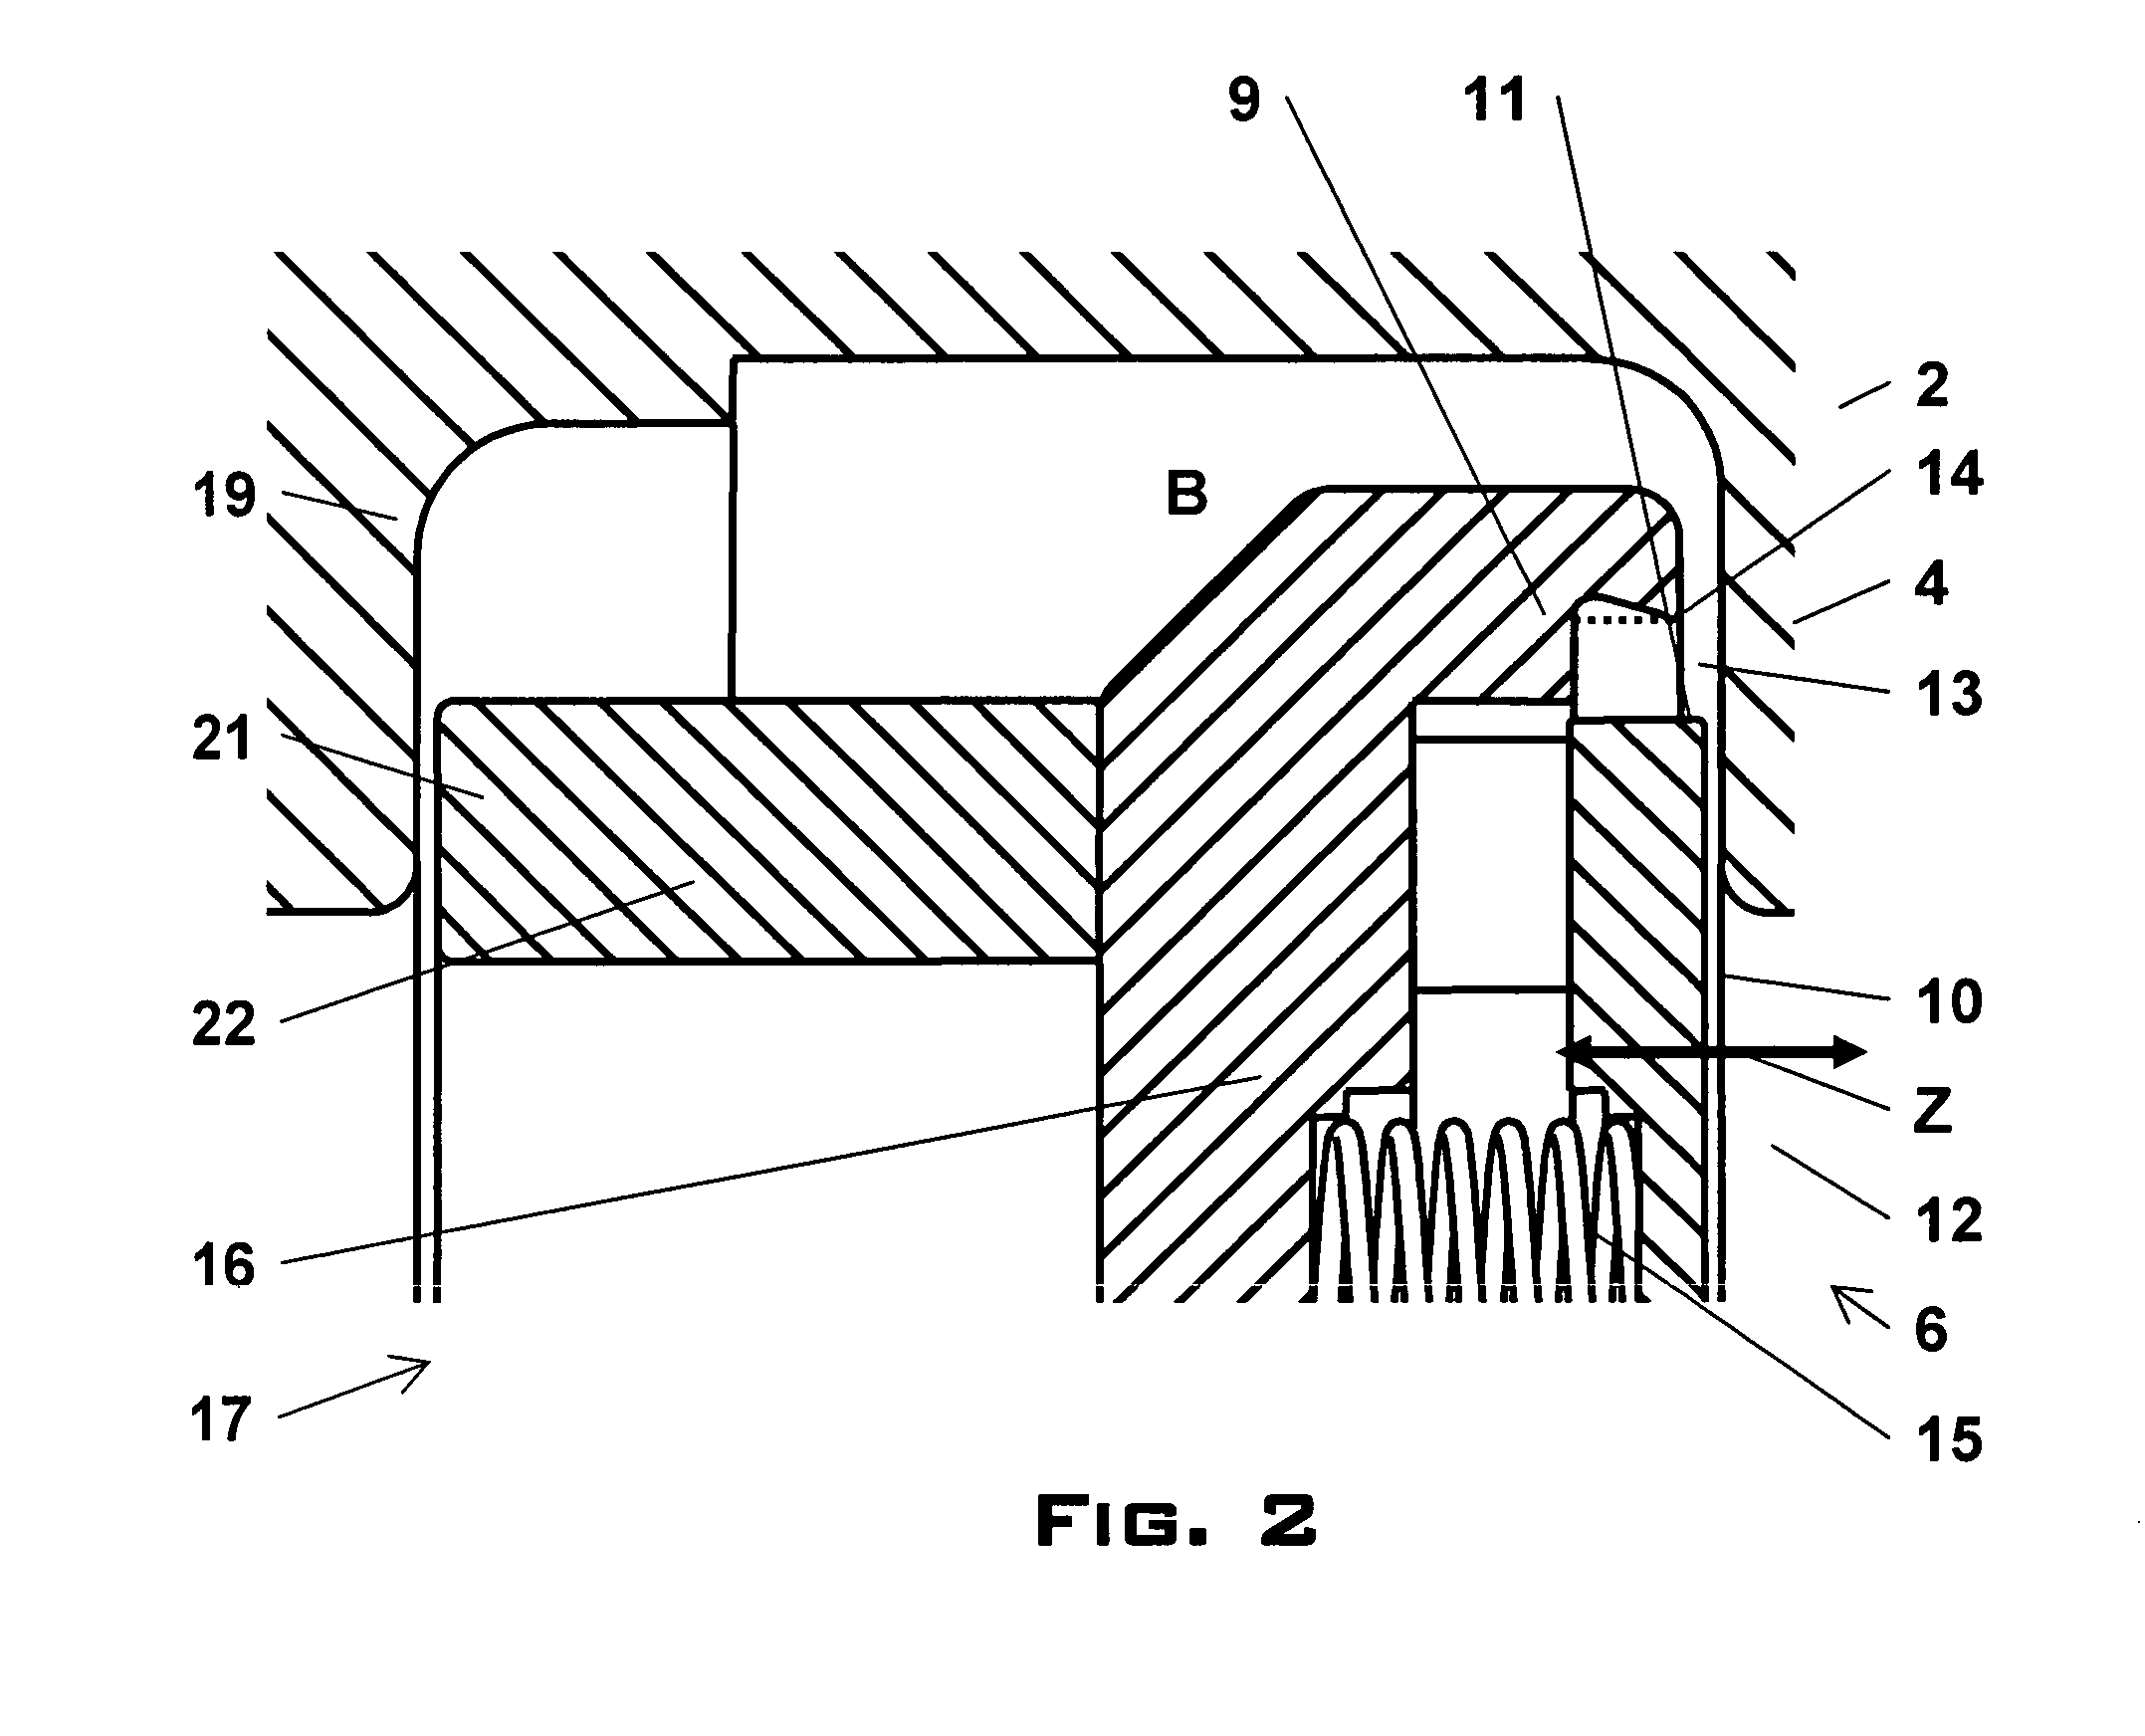 Valve for essentially gastight closing a flow path